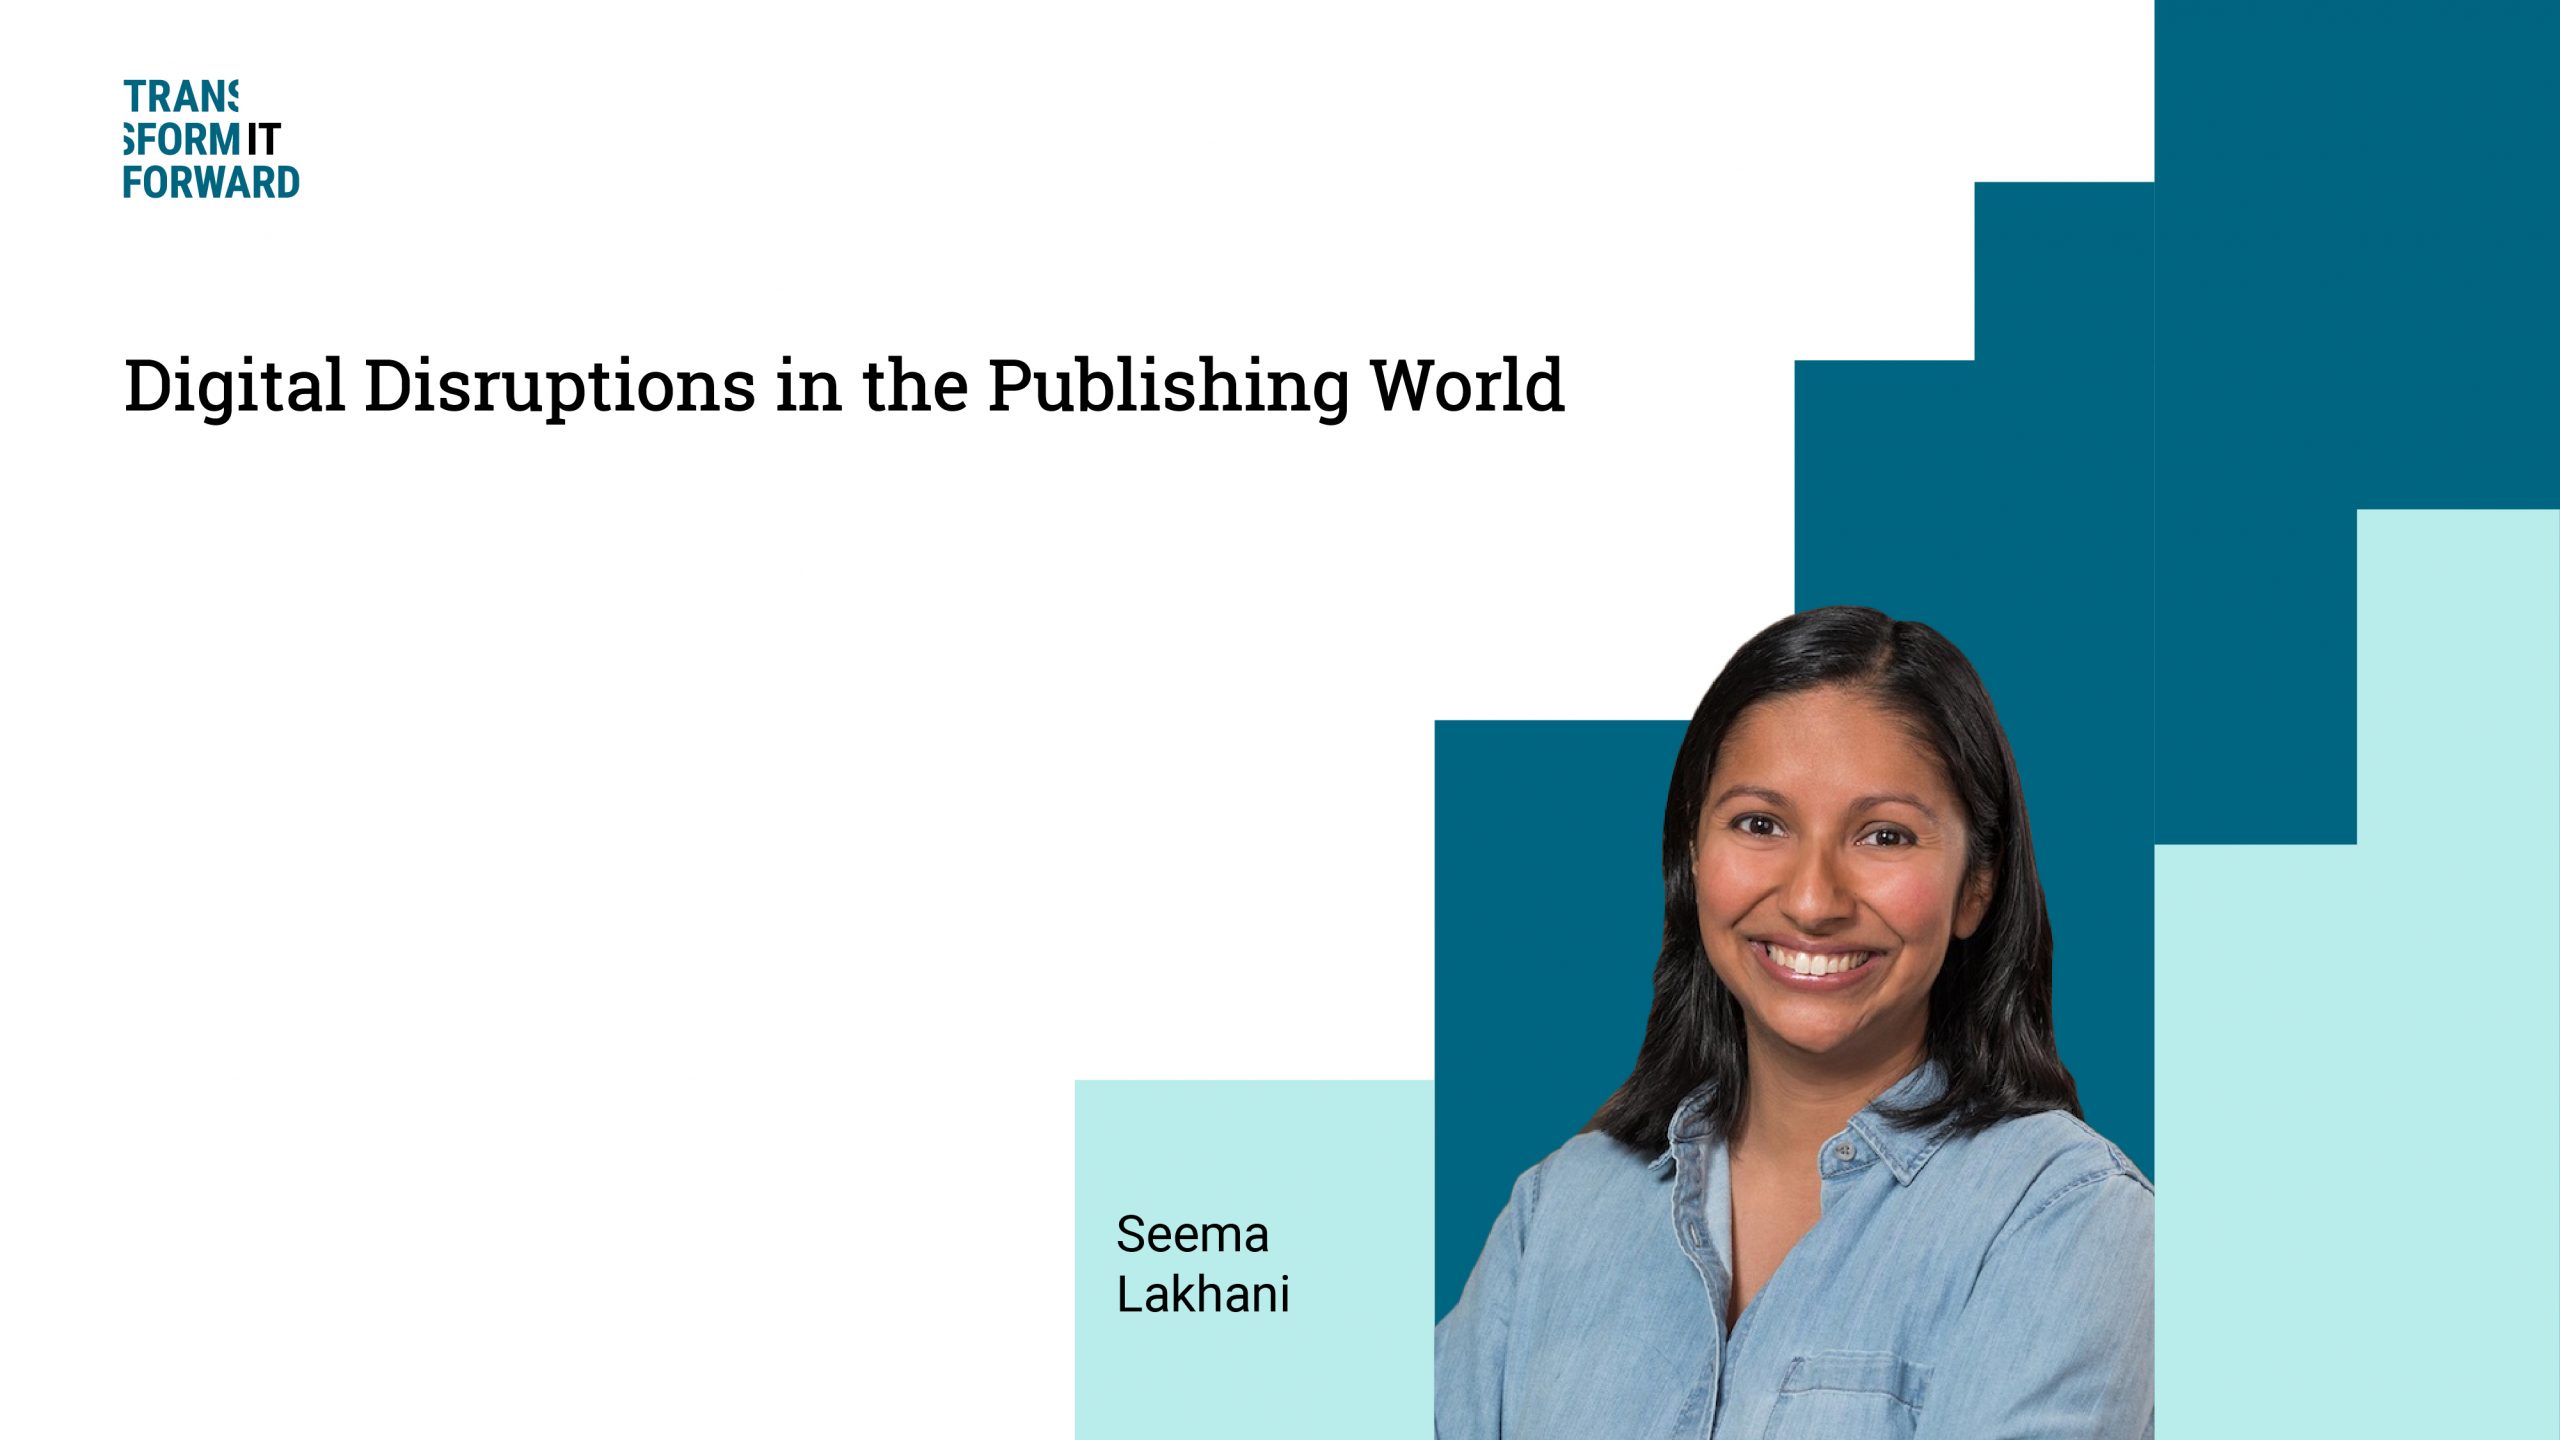 Digital disruptions in the publishing world